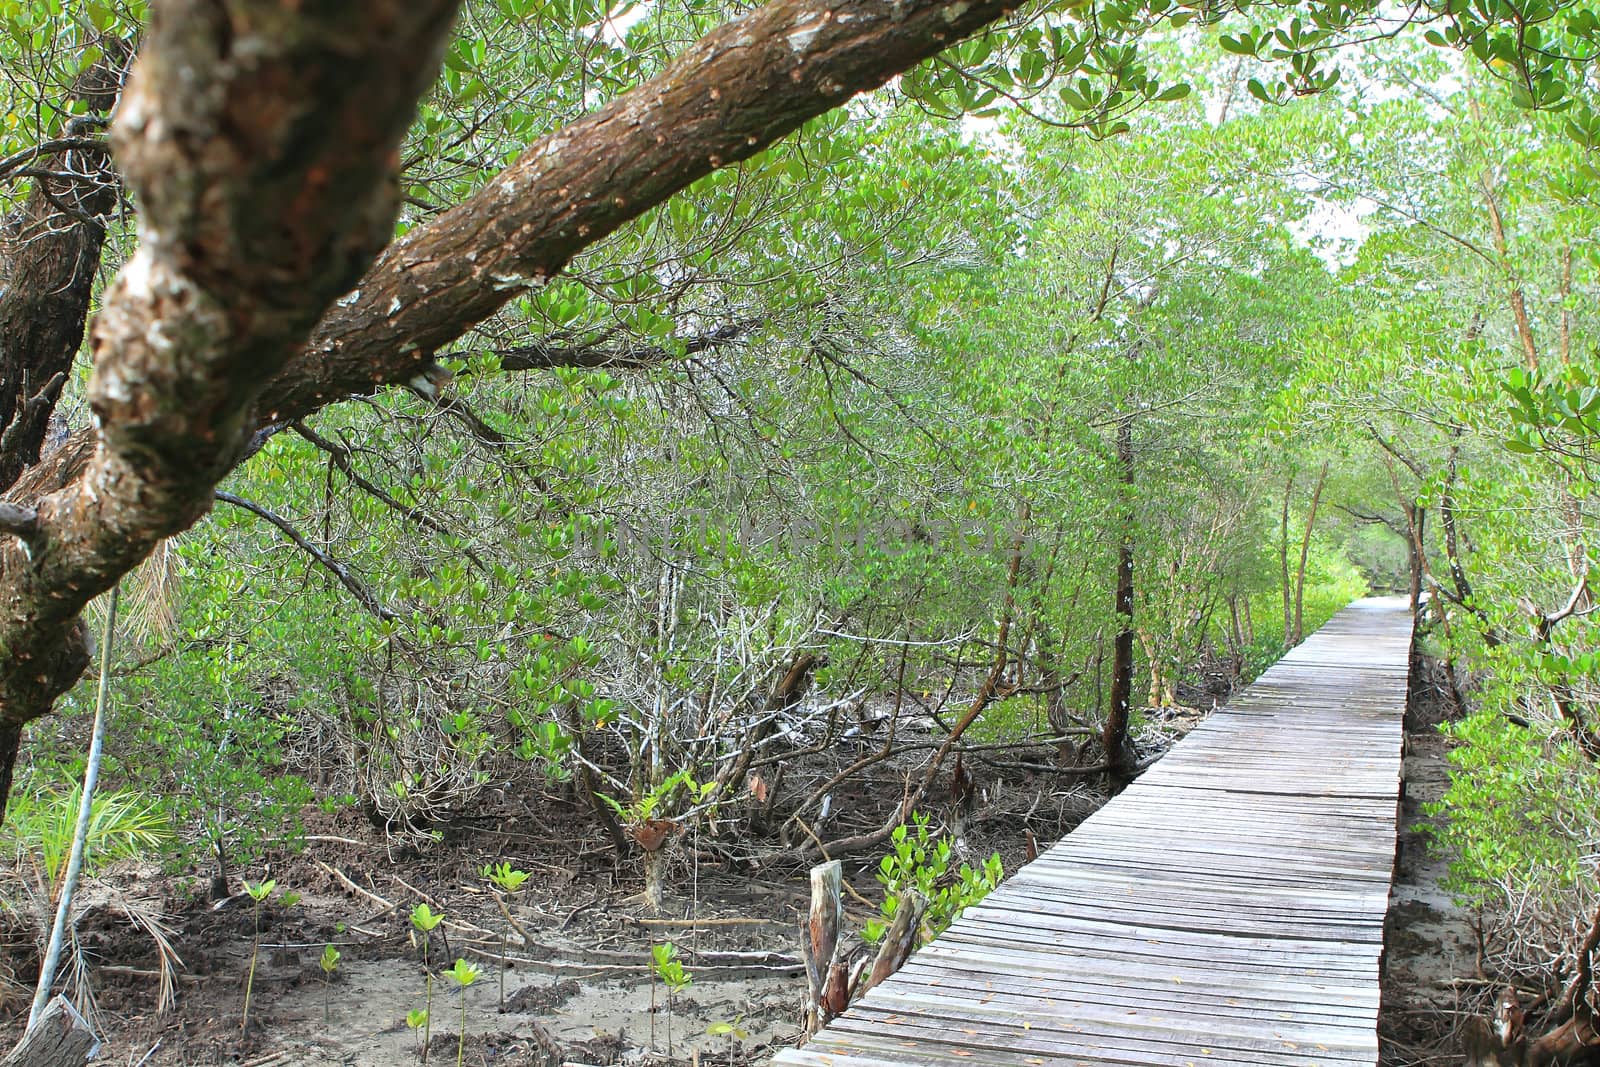 Wood path way among the Mangrove forest, Thailand 
 by rufous